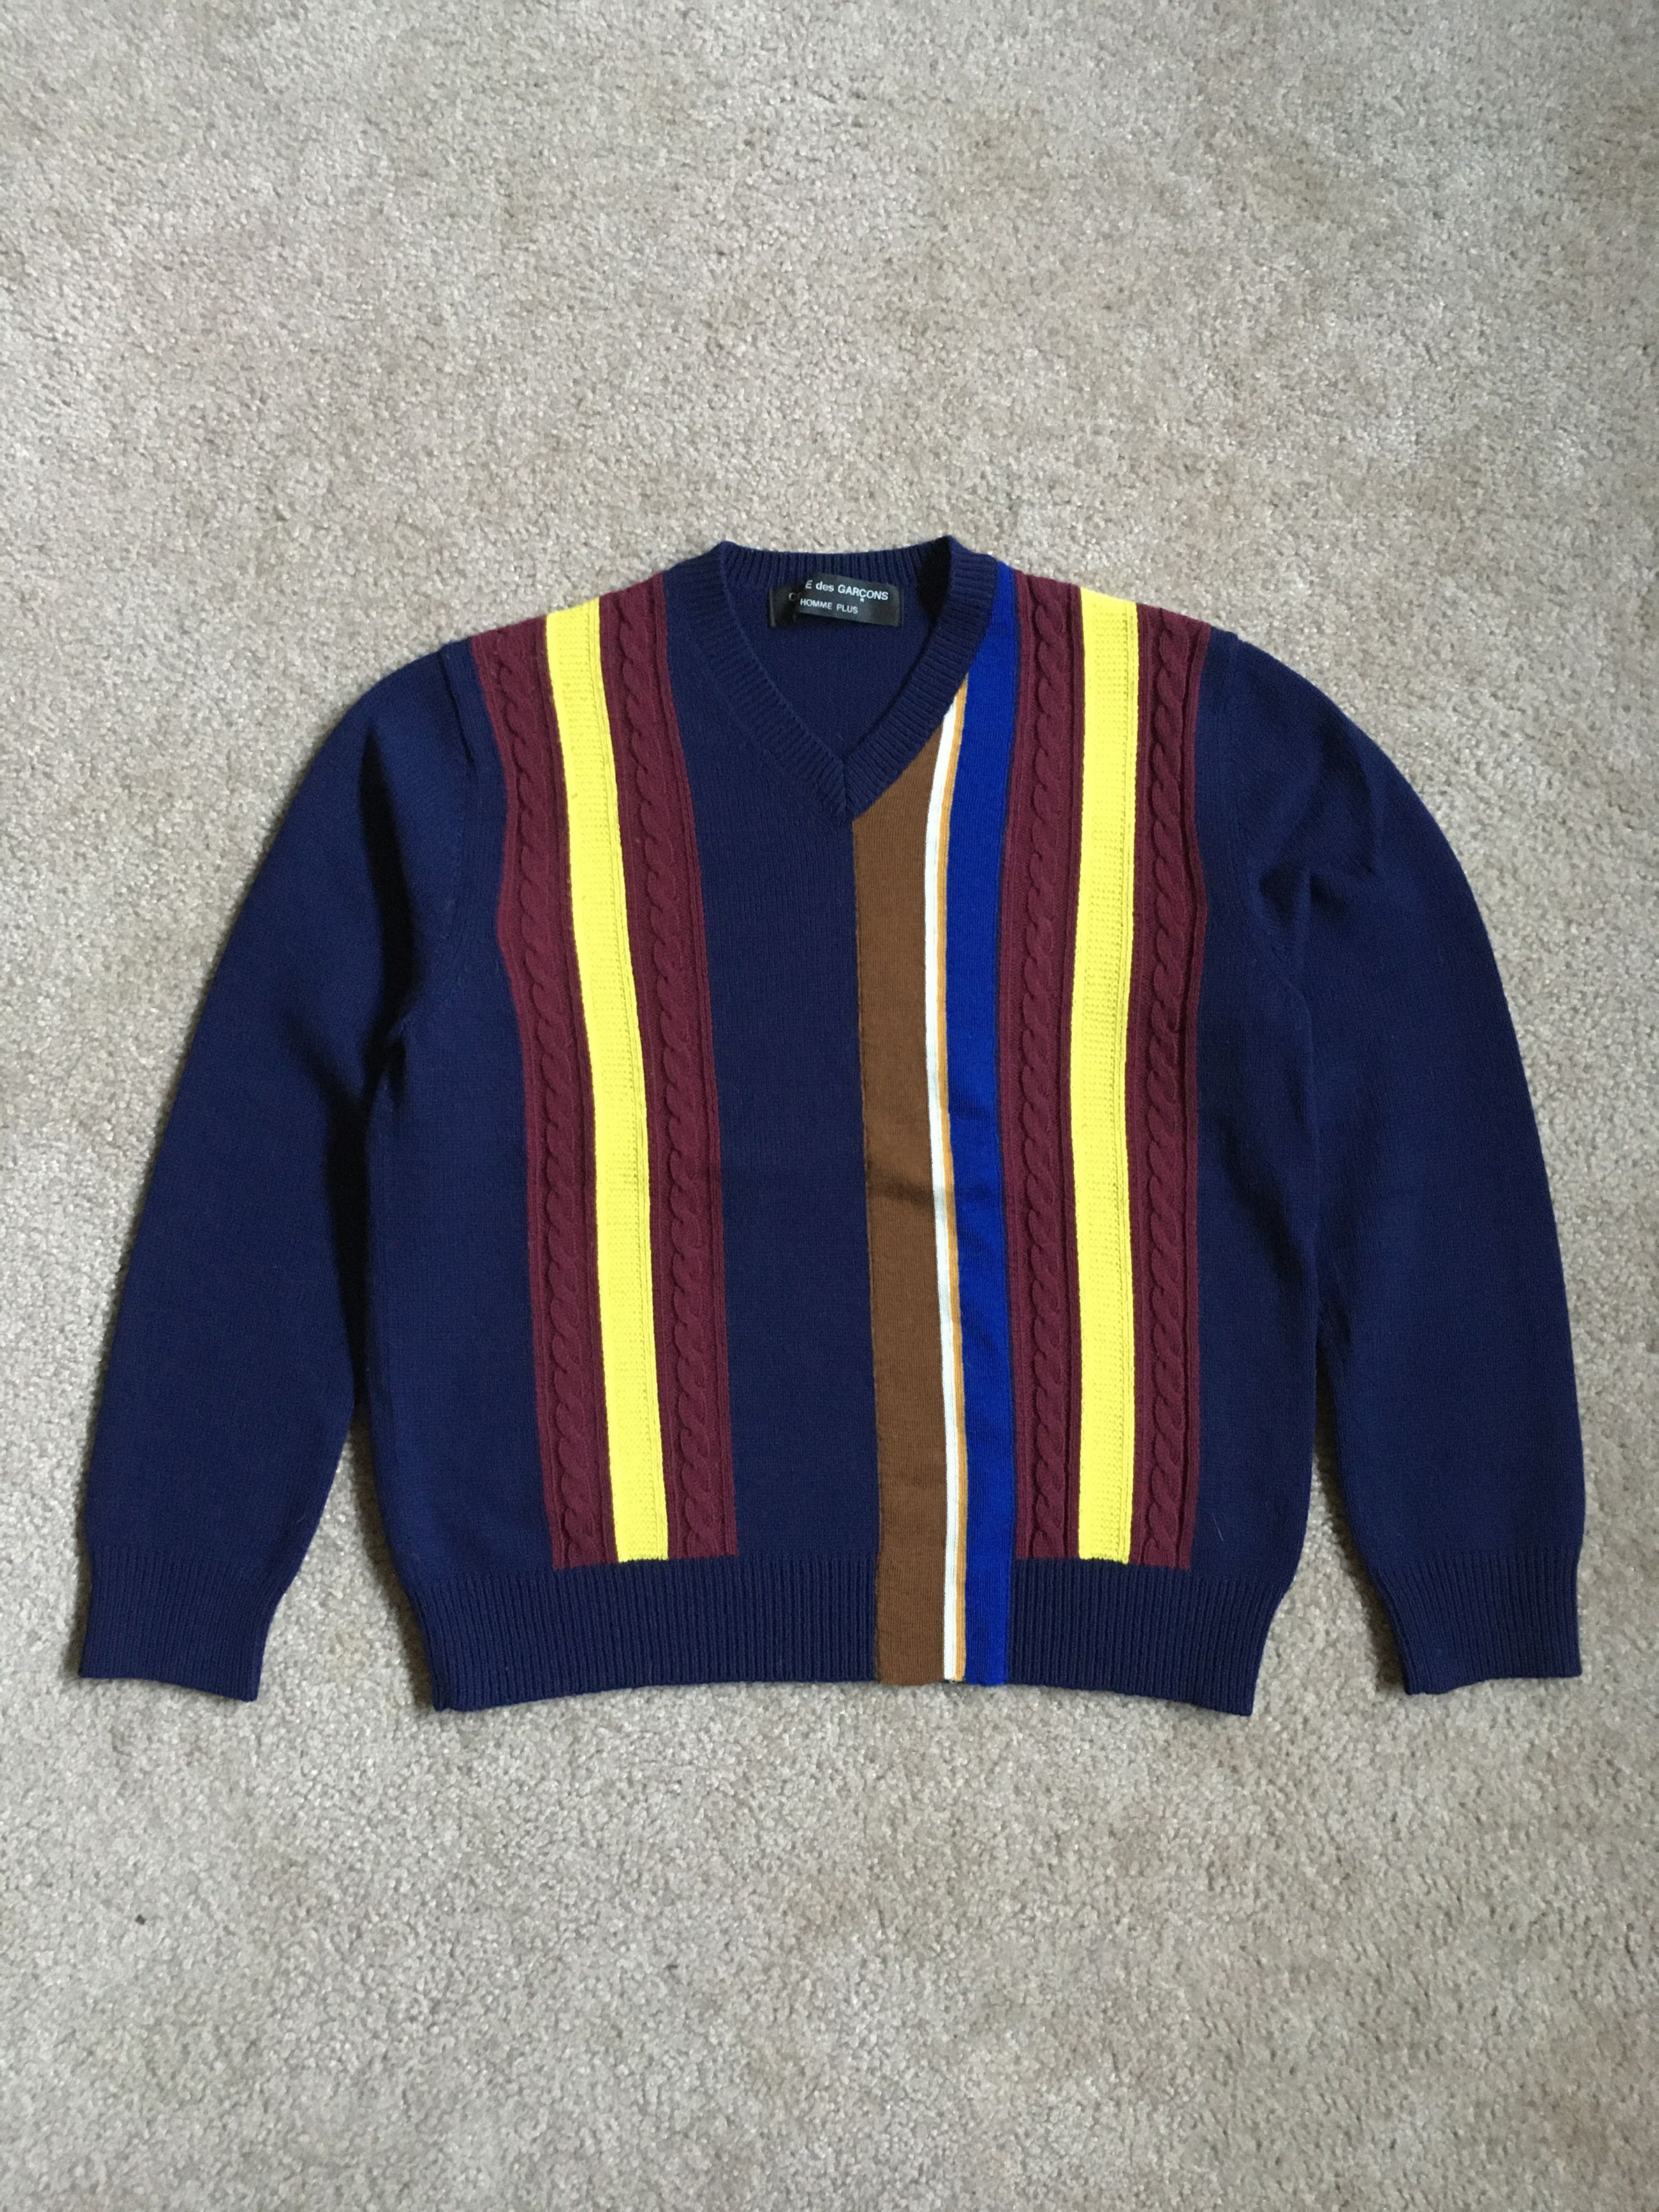 Comme des Garcons AW00 Offset Stripe Sweater | Grailed